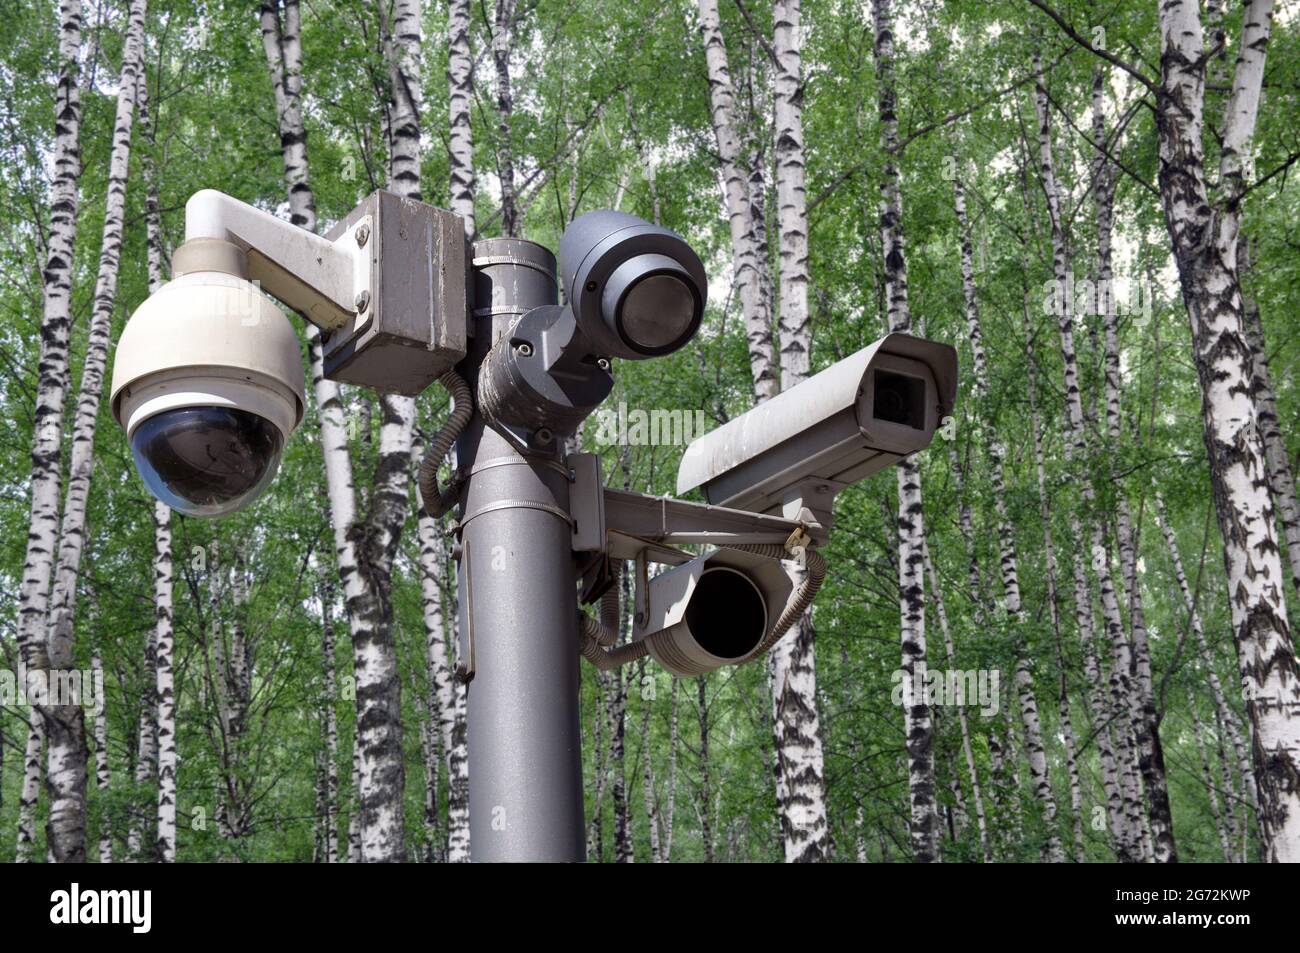 Many CCTV cameras on the background of a birch grove. Big brother concept. Face recognition. No privacy. Stock Photo